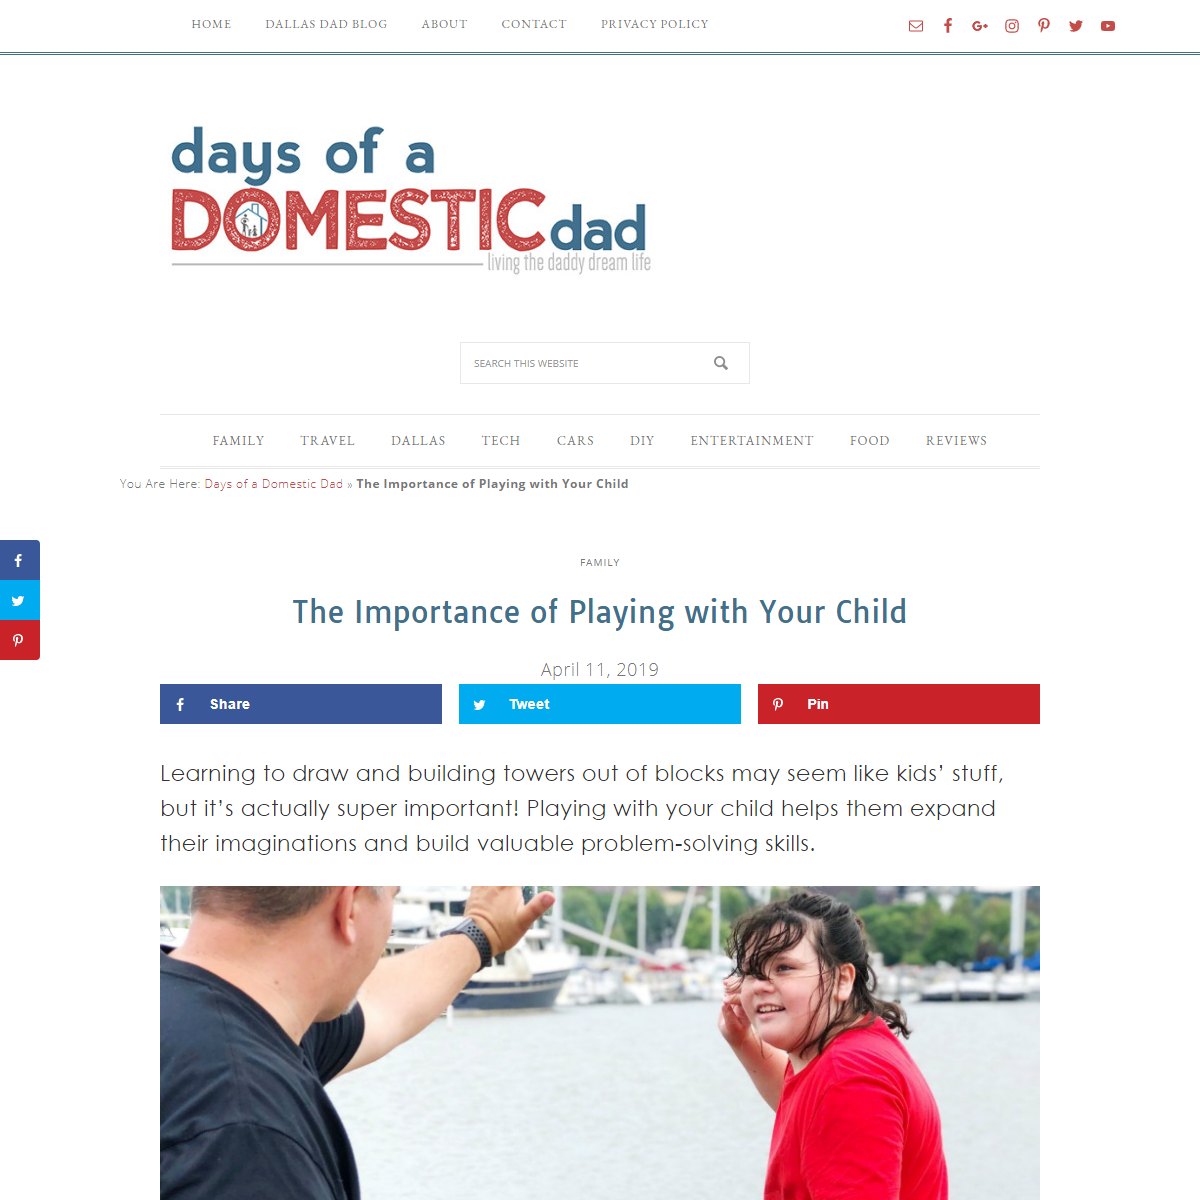 A complete backup of https://daysofadomesticdad.com/the-importance-of-playing-with-your-child/